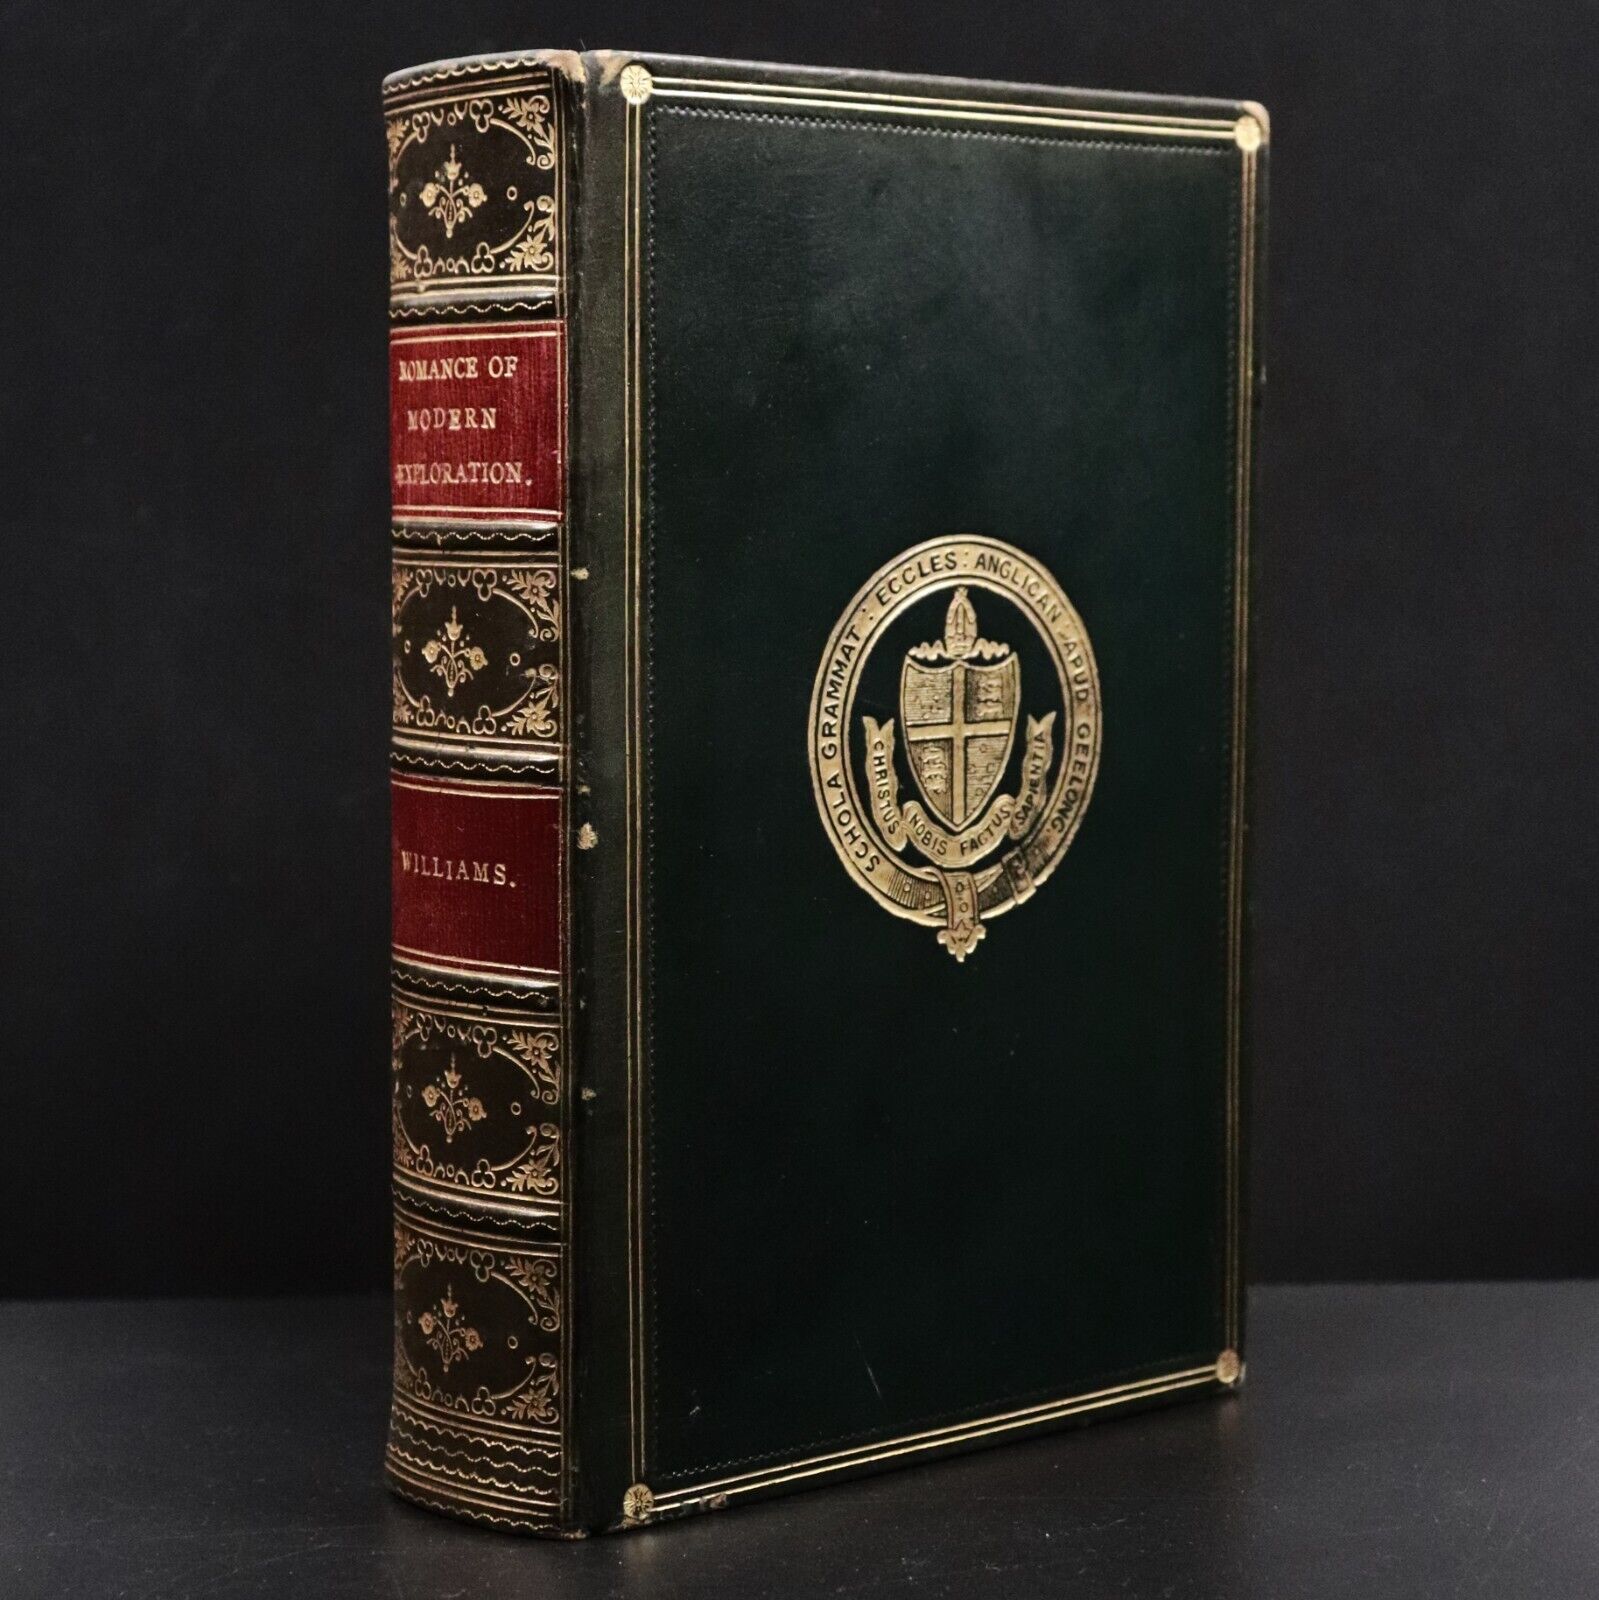 1910 The Romance Of Modern Exploration by A. Williams Antique Exploration Book